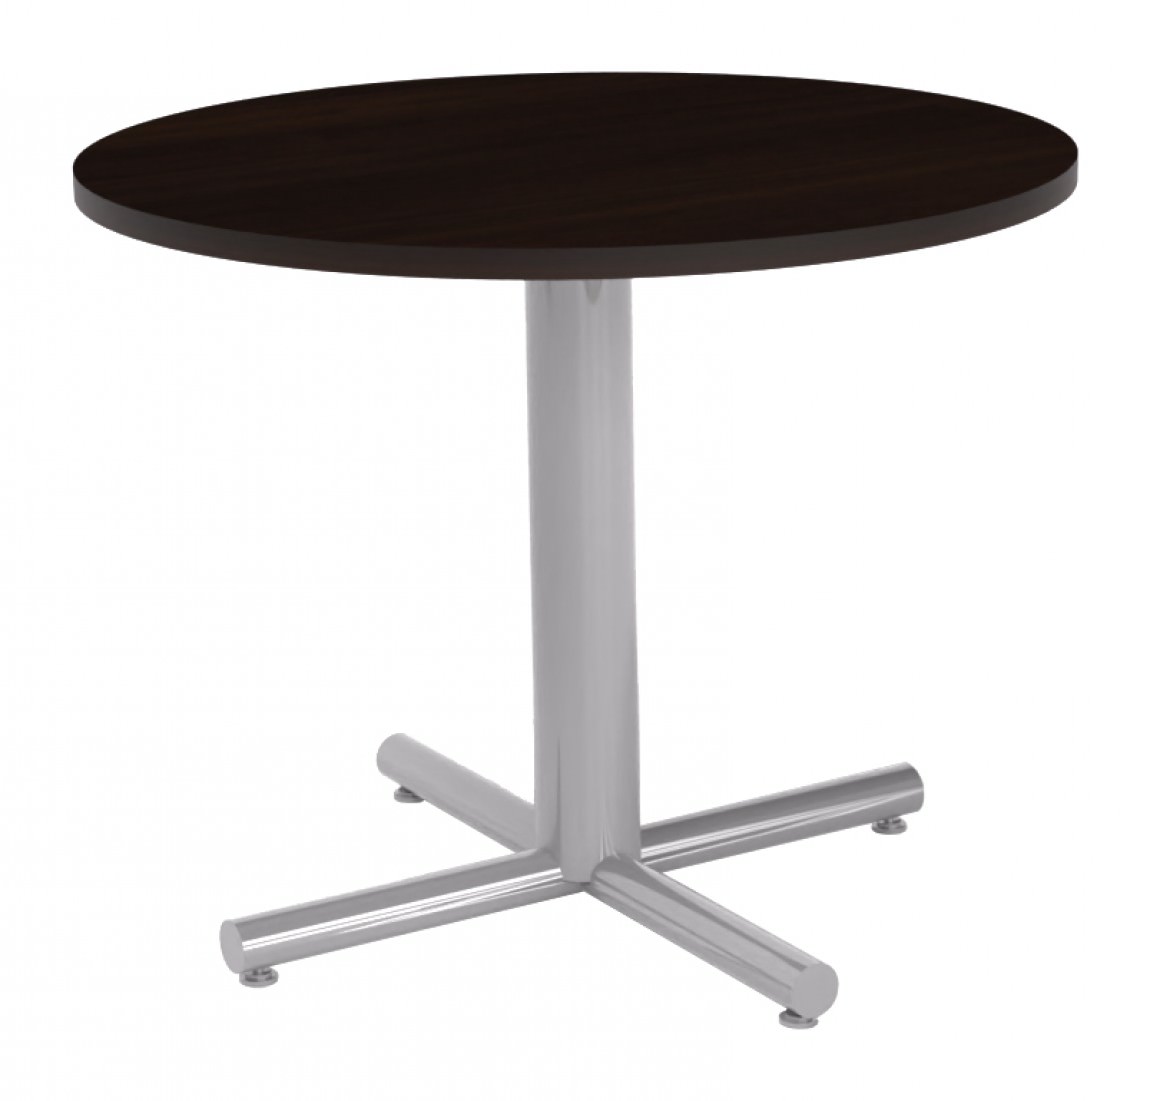 Eko Round Meeting Table 1200mm Round, Nordic Maple Top / Silver Frame, Desks & Tables, Knight, Leaner Tables, Meeting Tables, Office Furniture  & Presentation — Discount Office